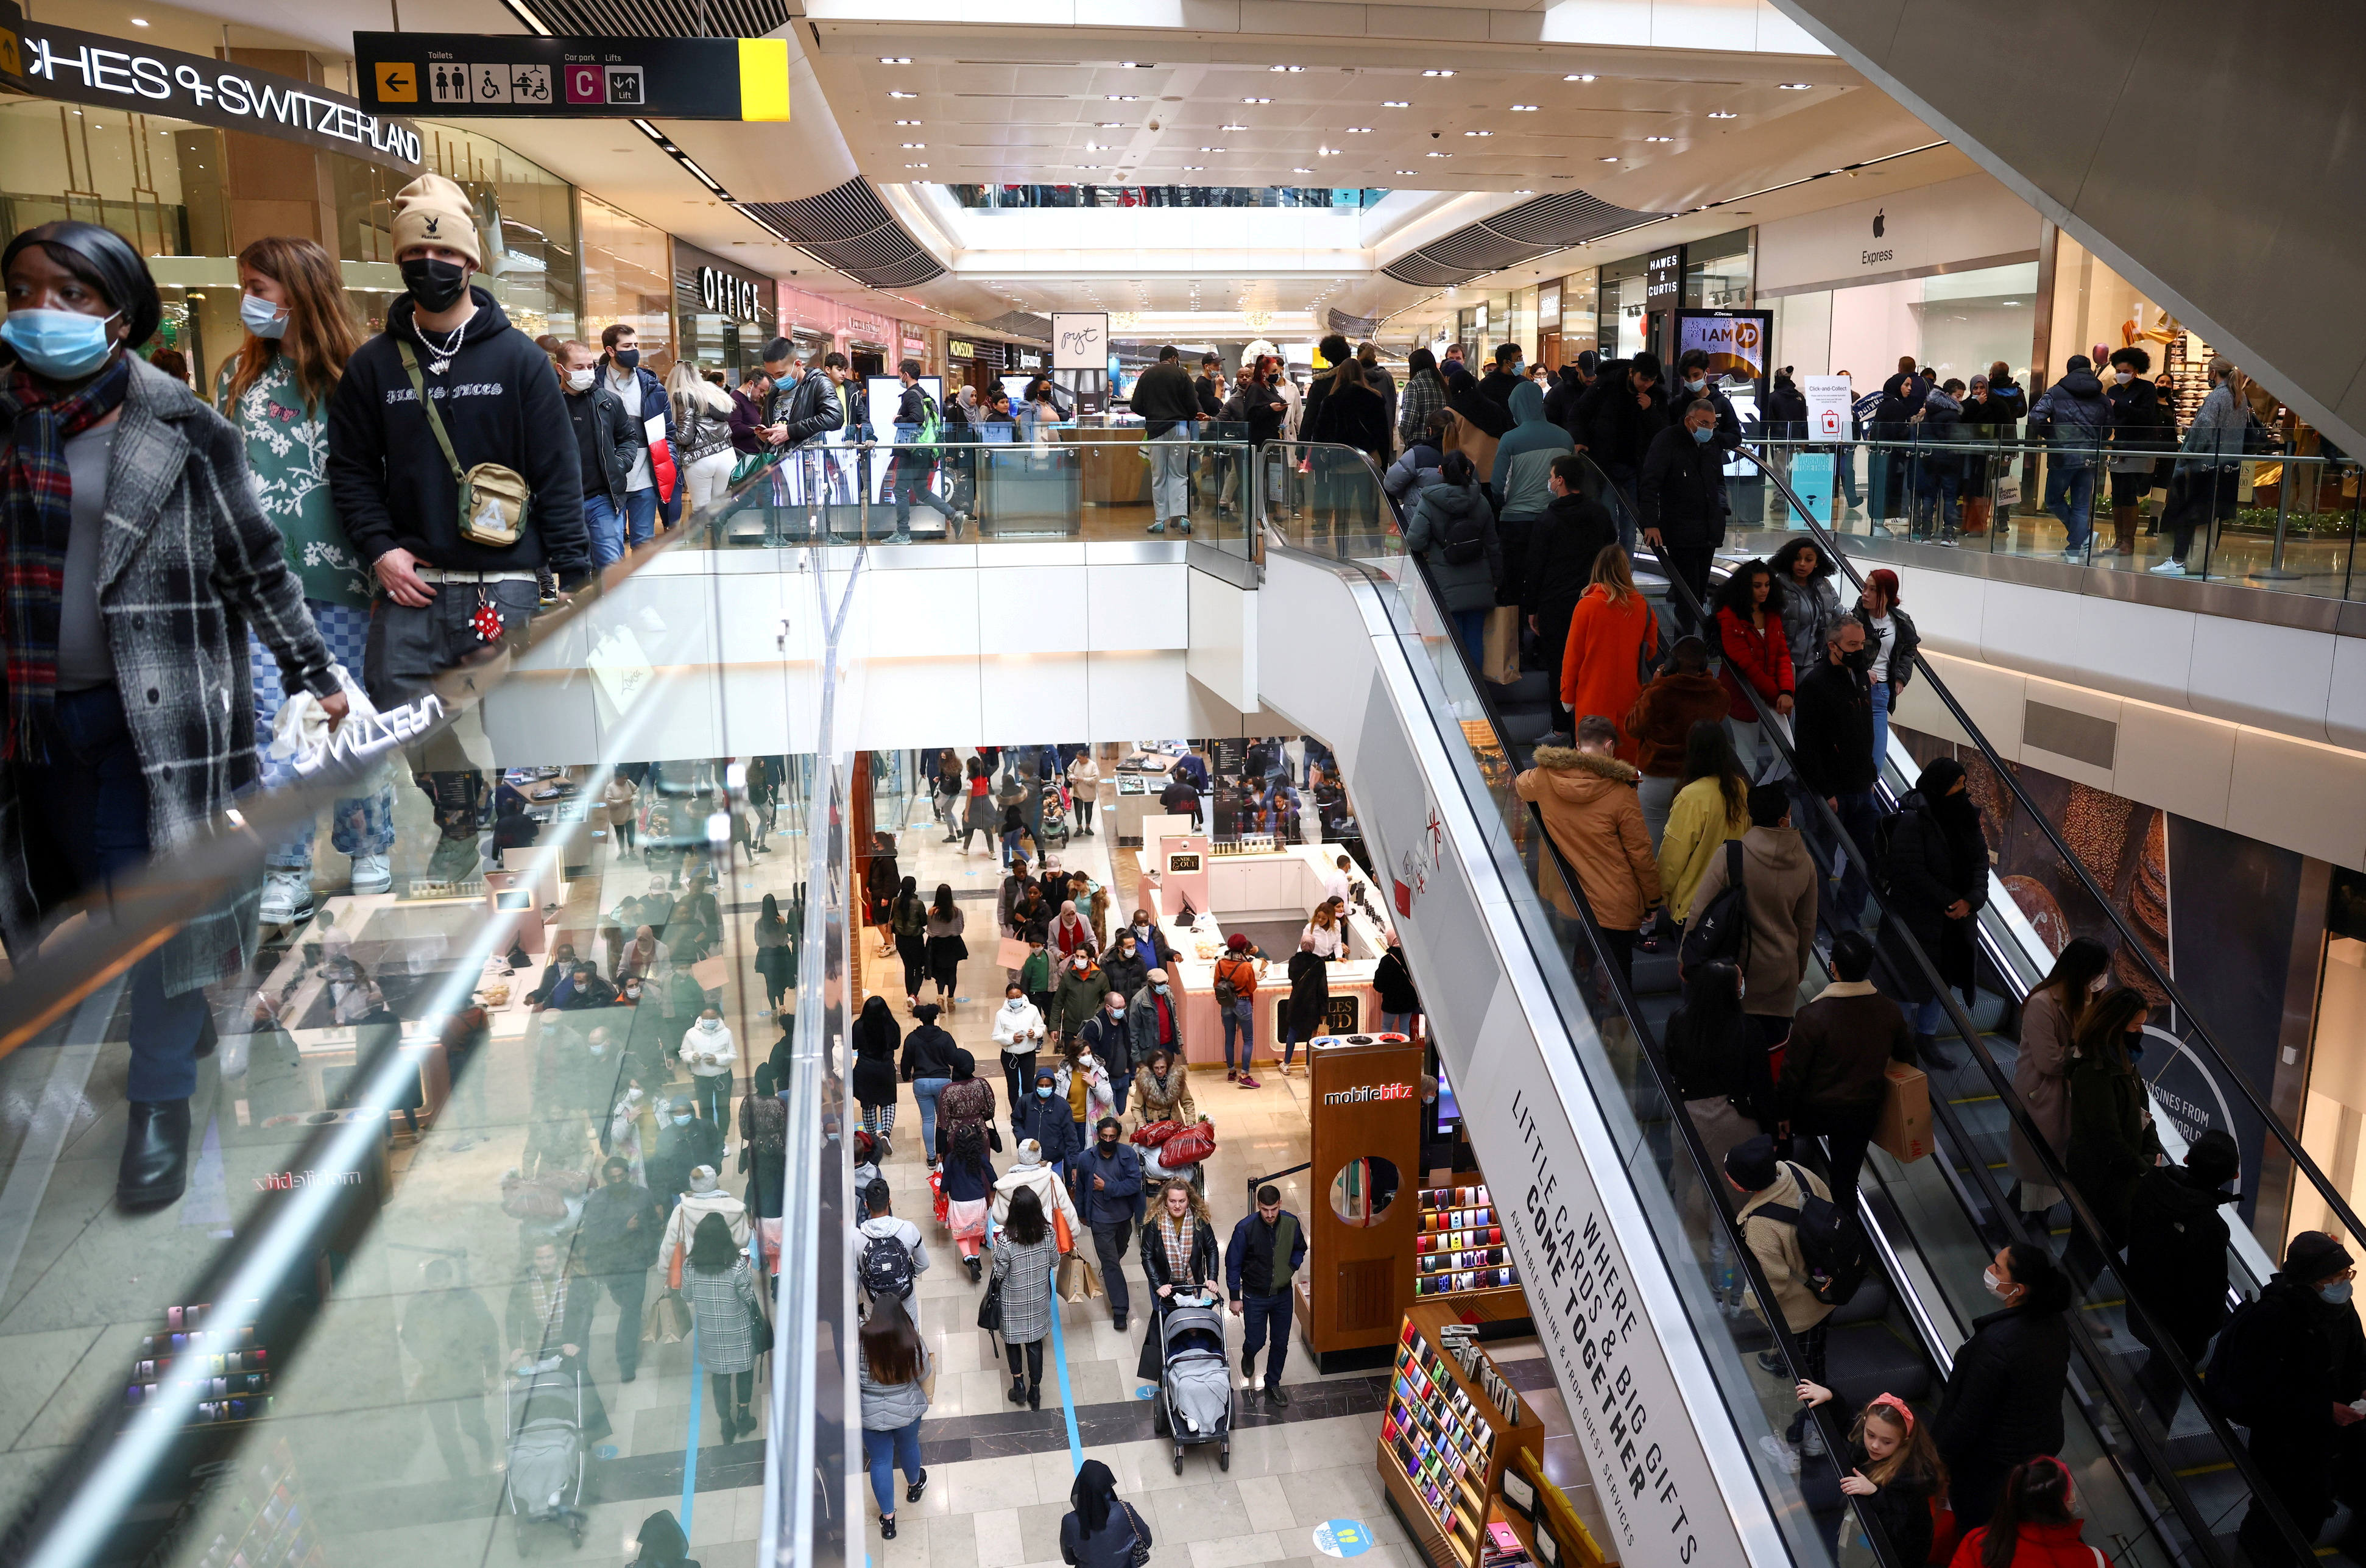 People walk through the Westfield Stratford City shopping centre, amid the coronavirus disease (COVID-19) outbreak in London, Britain, December 5, 2020. REUTERS/Henry Nicholls//File Photo